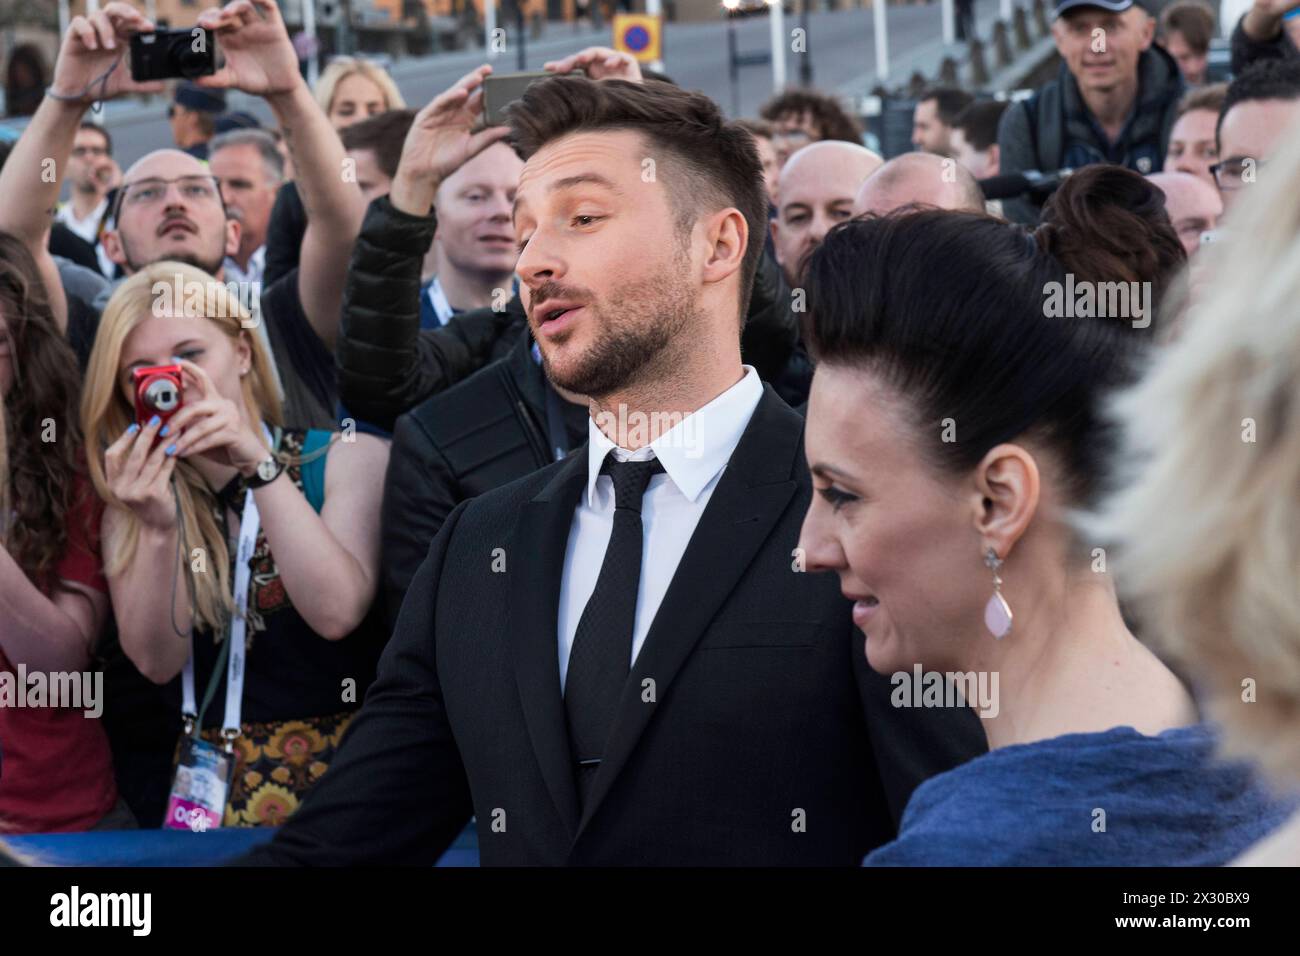 Eurovision Song Contest 2016, Stockholm, Sweden Stockholm, Sweden. 8 May. Sergey Lazarev from Russia on the red carpet for the ESC 2016. Stockholm Euroclub Sweden *** Eurovision Song Contest 2016, Stockholm, Sweden Stockholm, Sweden 8 May Sergey Lazarev from Russia on the red carpet for the ESC 2016 Stockholm Euroclub Sweden Stock Photo